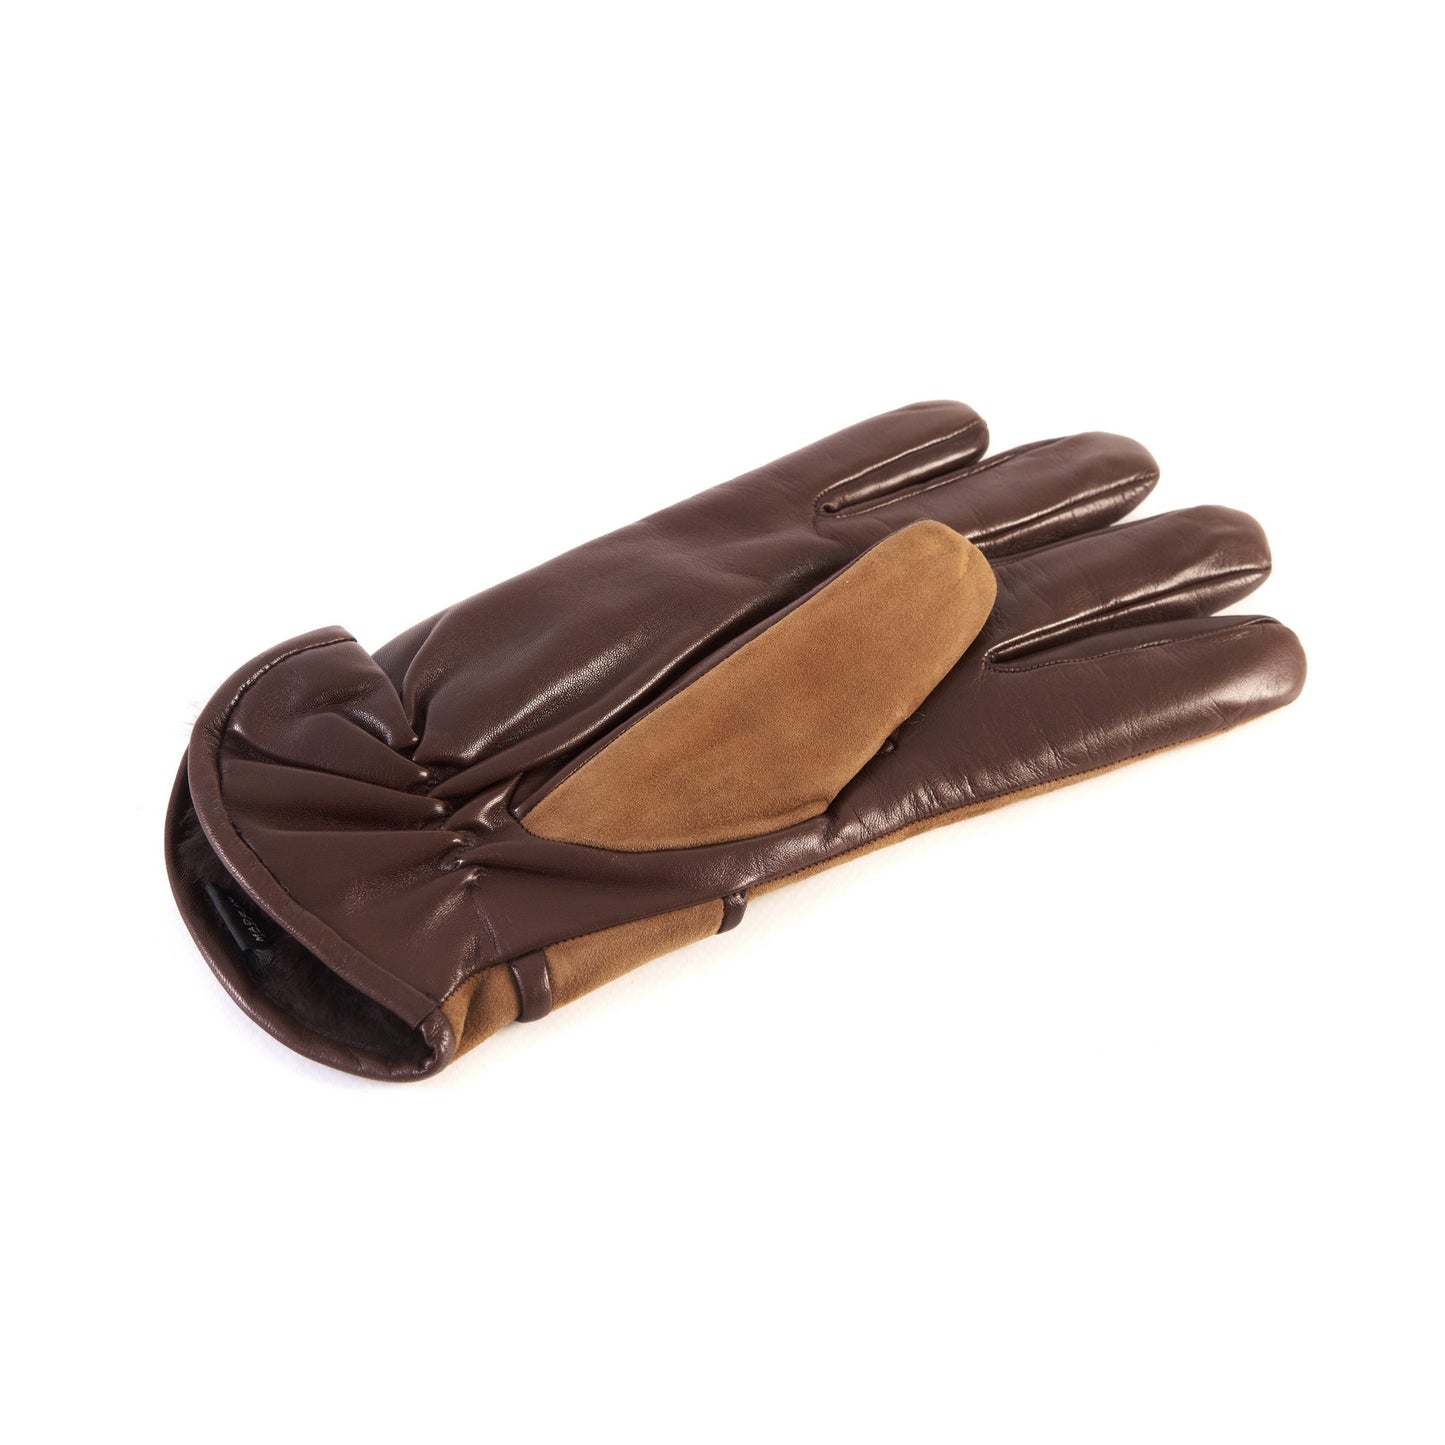 Men's tobacco nappa and suede leather gloves with button and real fur lining